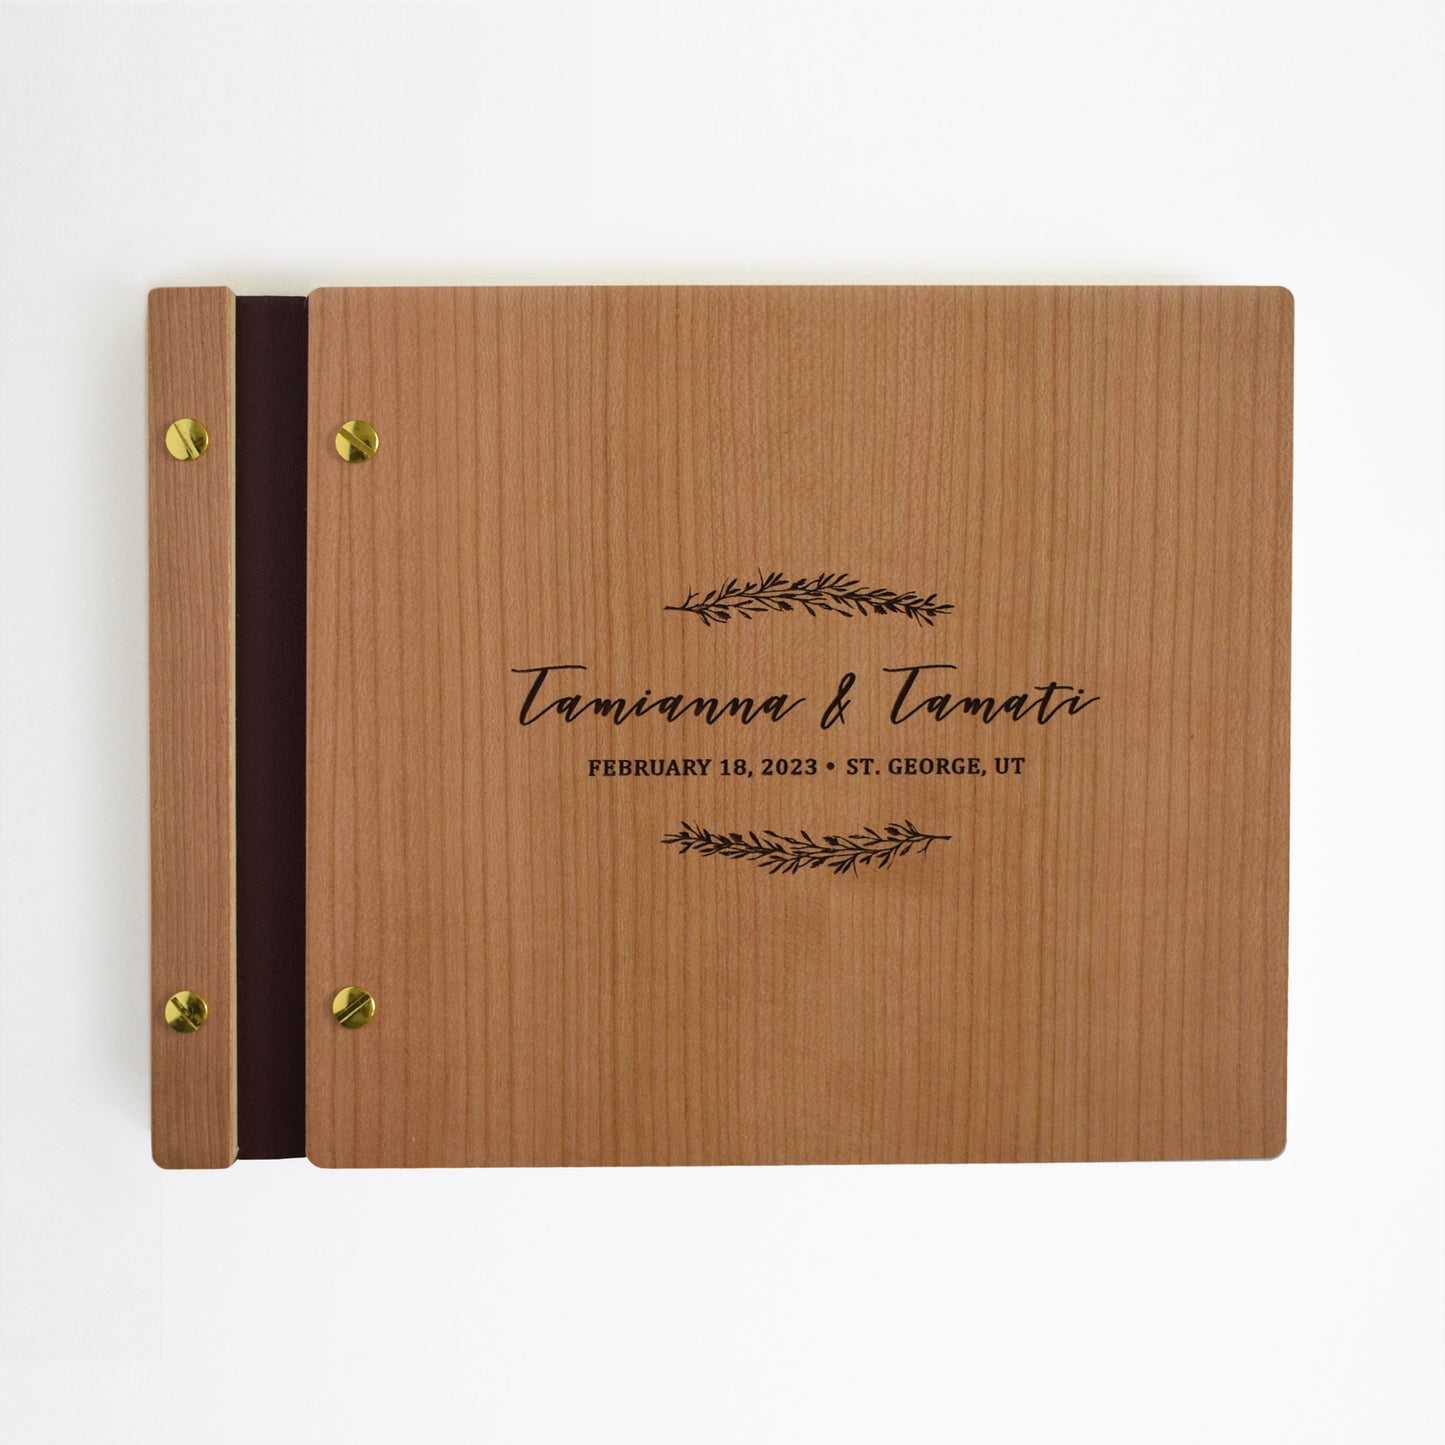 An 8.5x11" guest book lies on a table. Made of cherry wood, black vegan leather binding, and copper hardware. The front cover includes an engraved design with personalized names. 